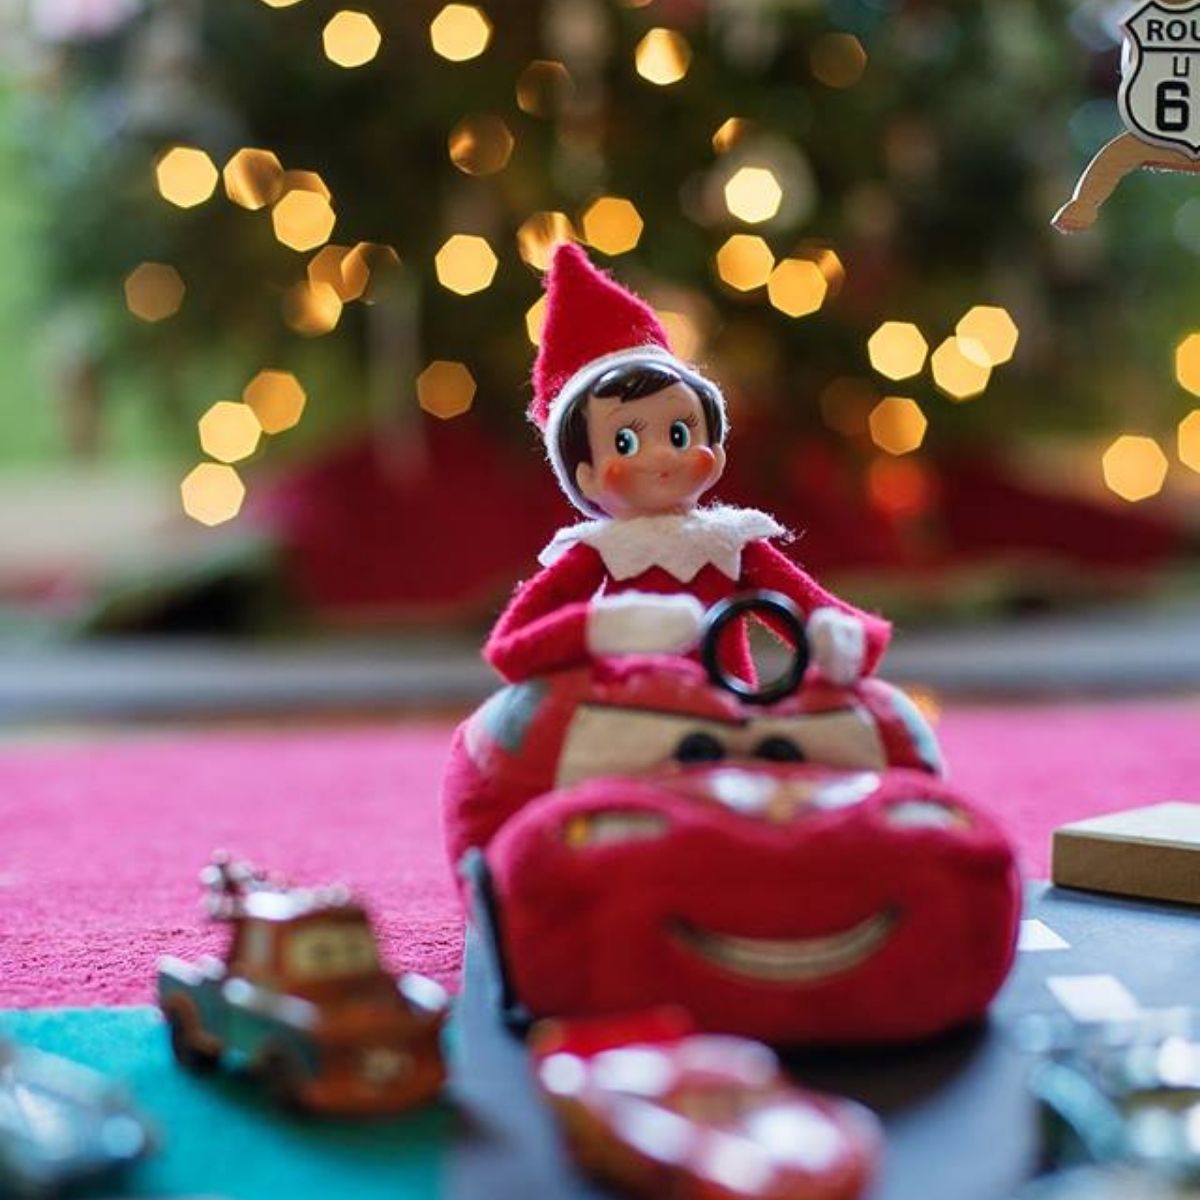 Elf on the Shelf riding a Lightning McQueen car toy with a Christmas tree in the background.